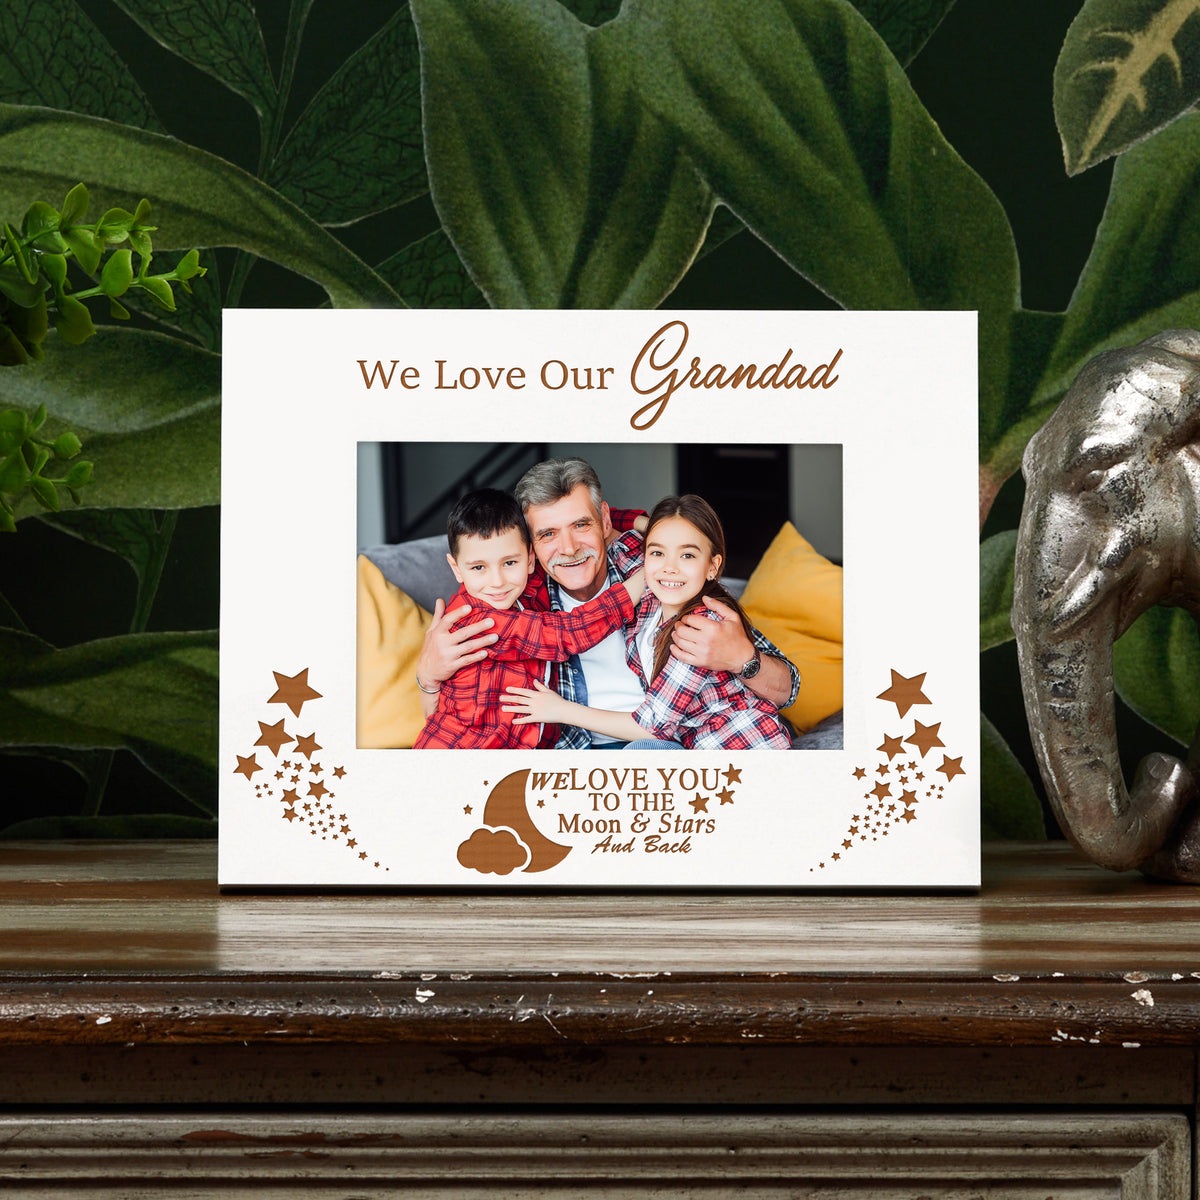 We Love Our Grandad White Wooden Photo Frame Gift